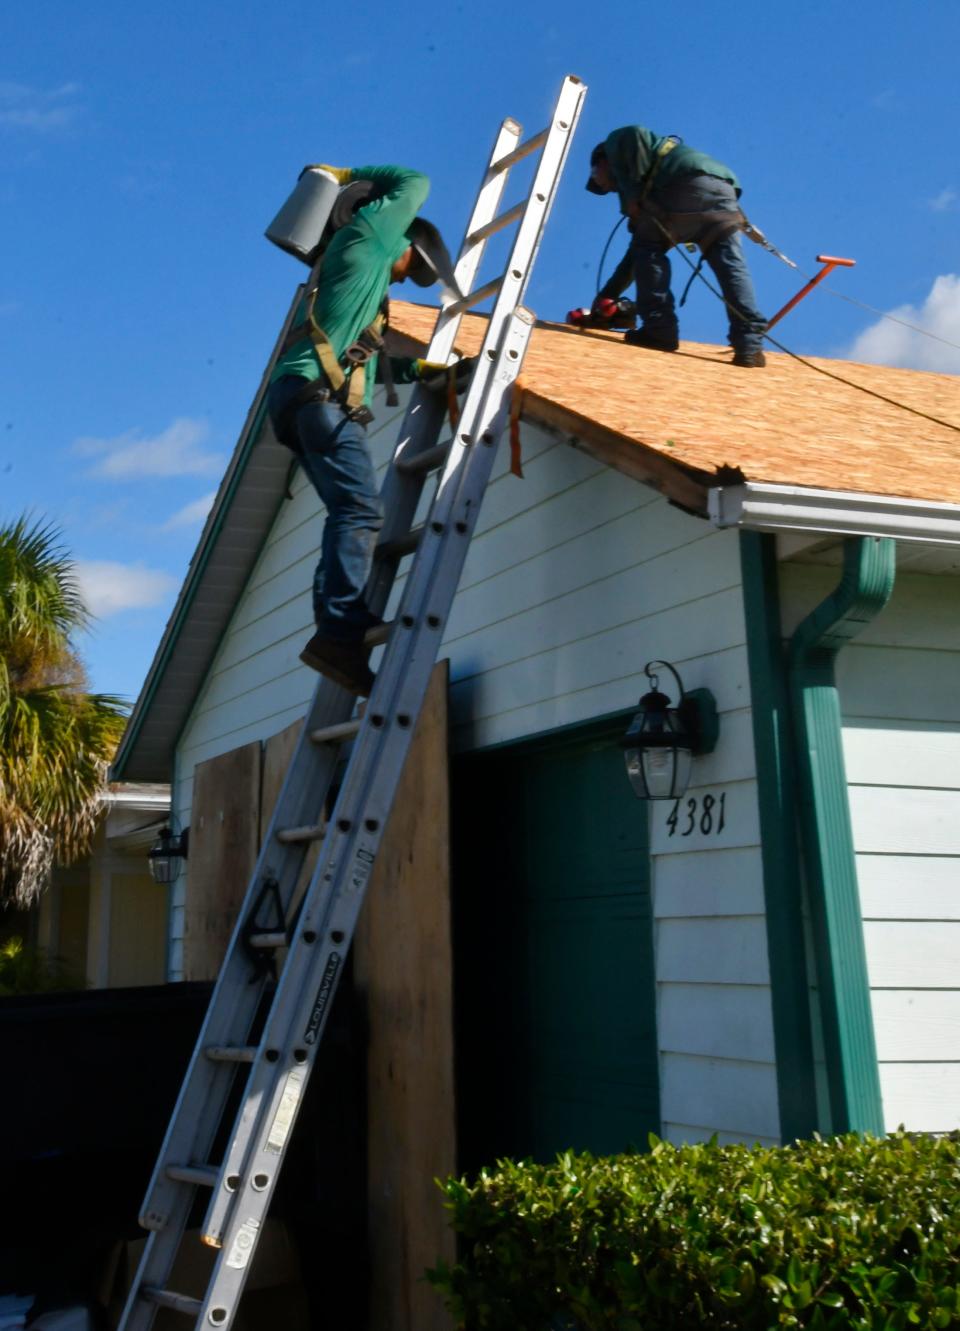 Space Coast Habitat for Humanity, the Owens Corning Roof replacement program, and Collis Roofing are providing Bruce Mitchell, a retired USAF Master Sgt. with a roof replacement on his Melbourne home. Due to injuries over s 24 years of service, Mitchell is fully disabled. This is one of four Veteran/Critical repair program projects they are currently involved in.